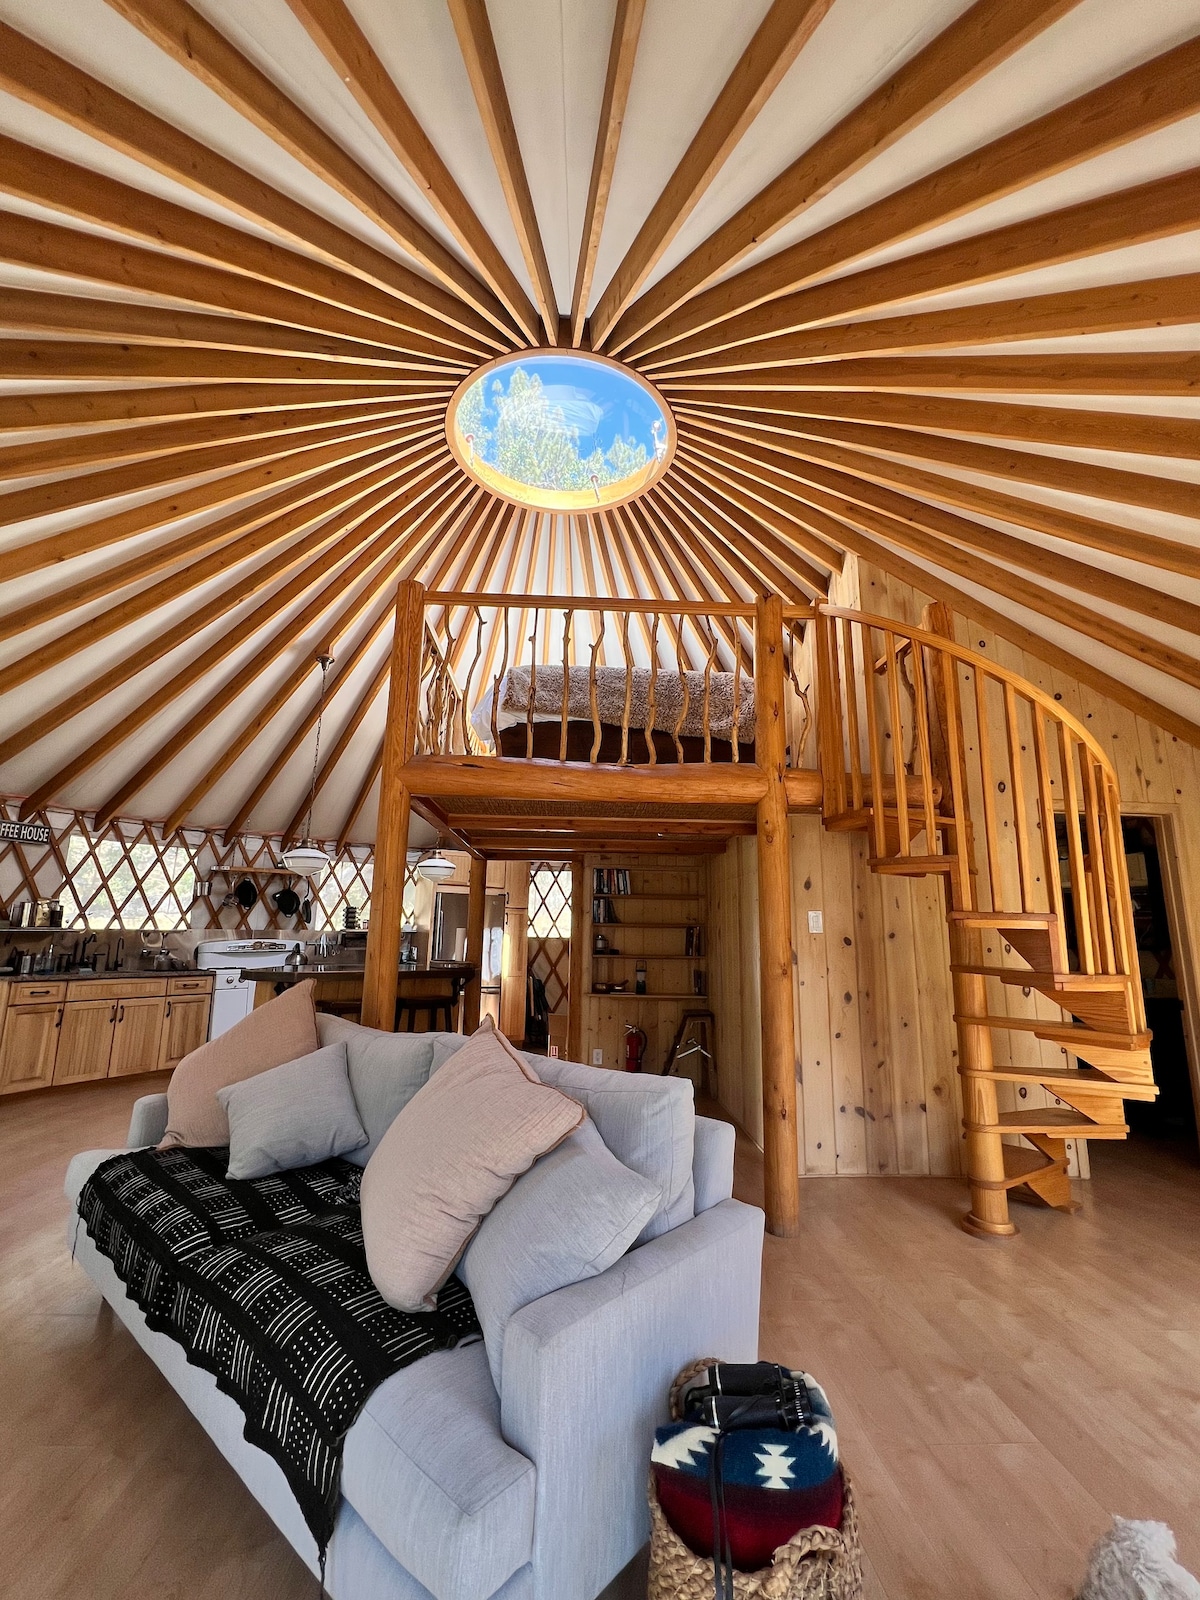 Glamping Off the Grid in a Stunning Yurt